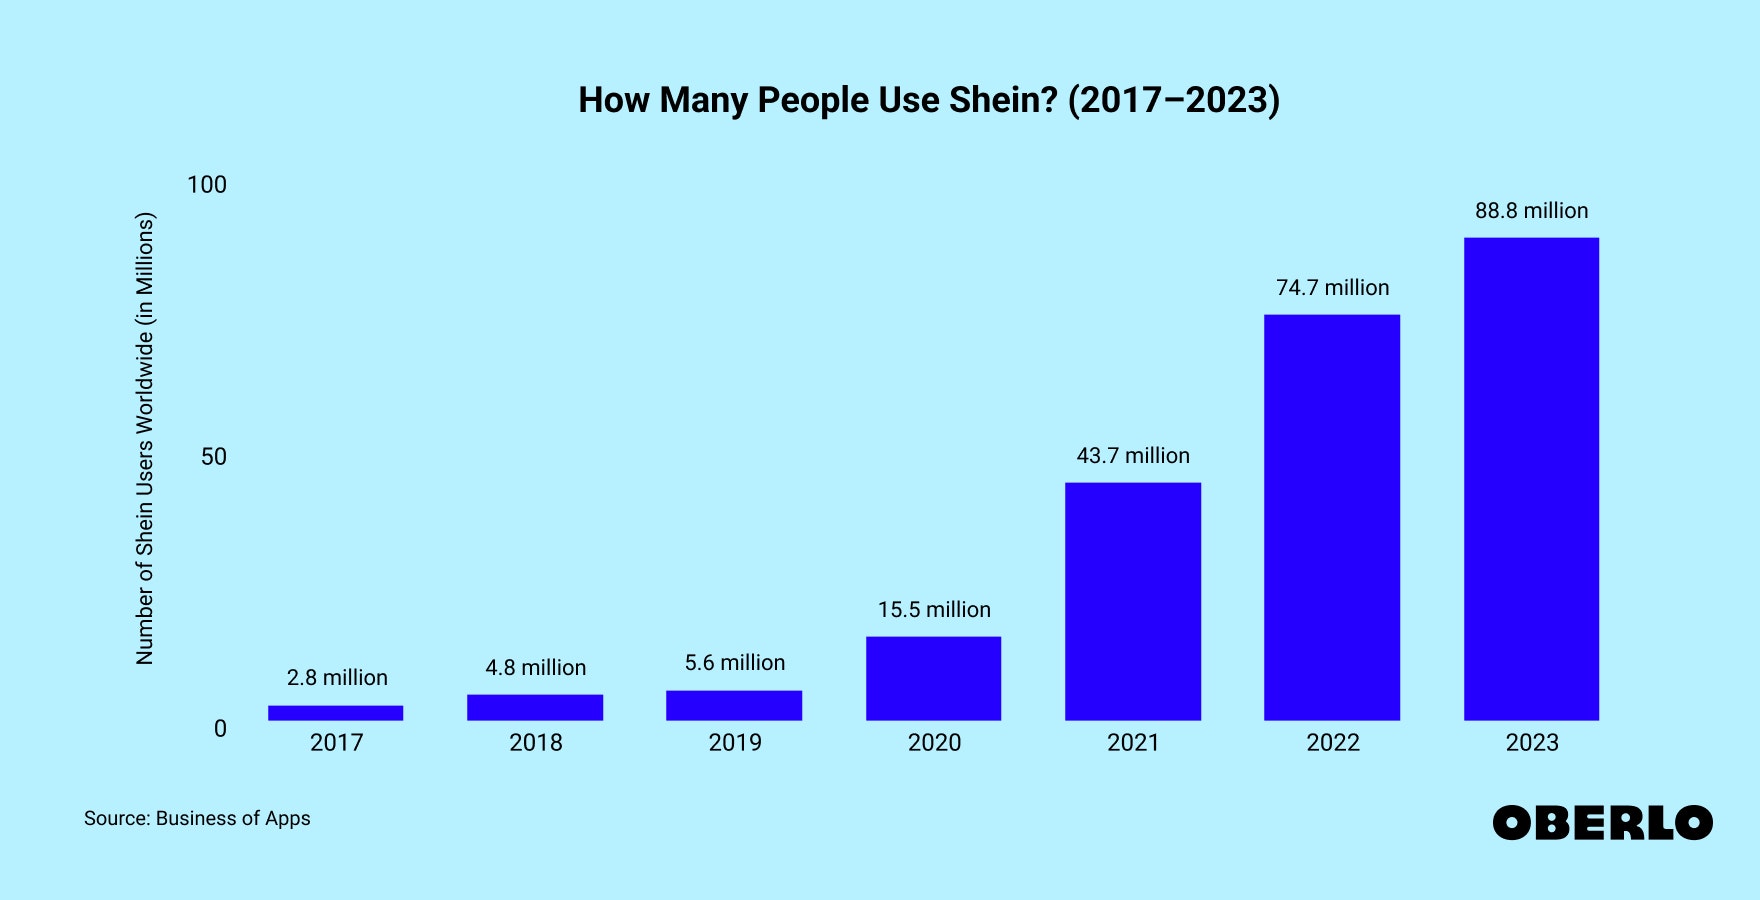 Chart showing: How many people use Shein globally: 2017–2023